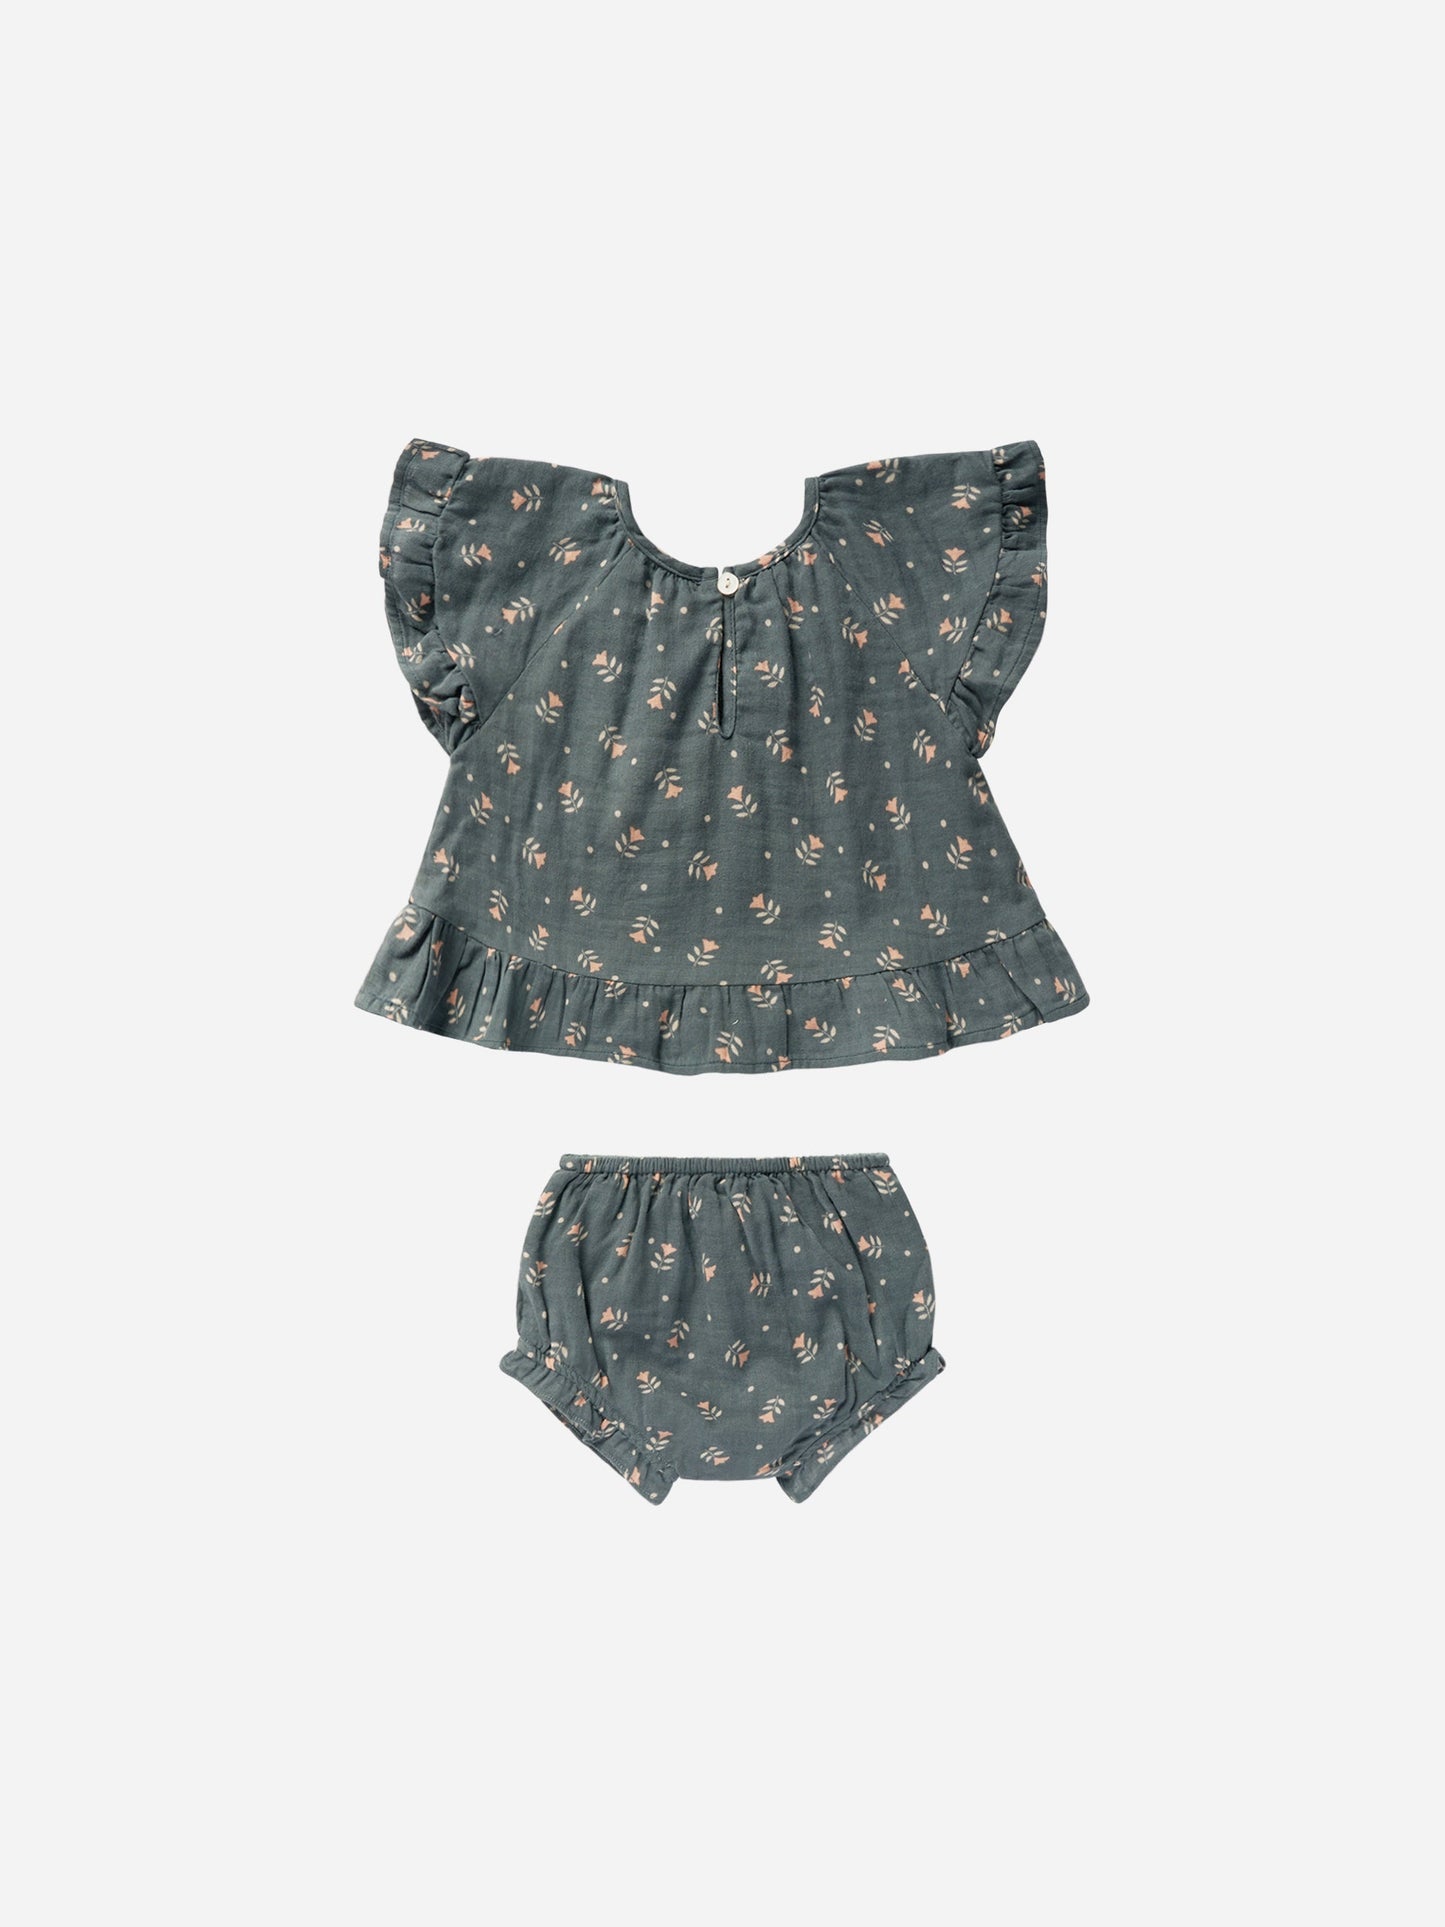 Butterfly top + Bloomer set